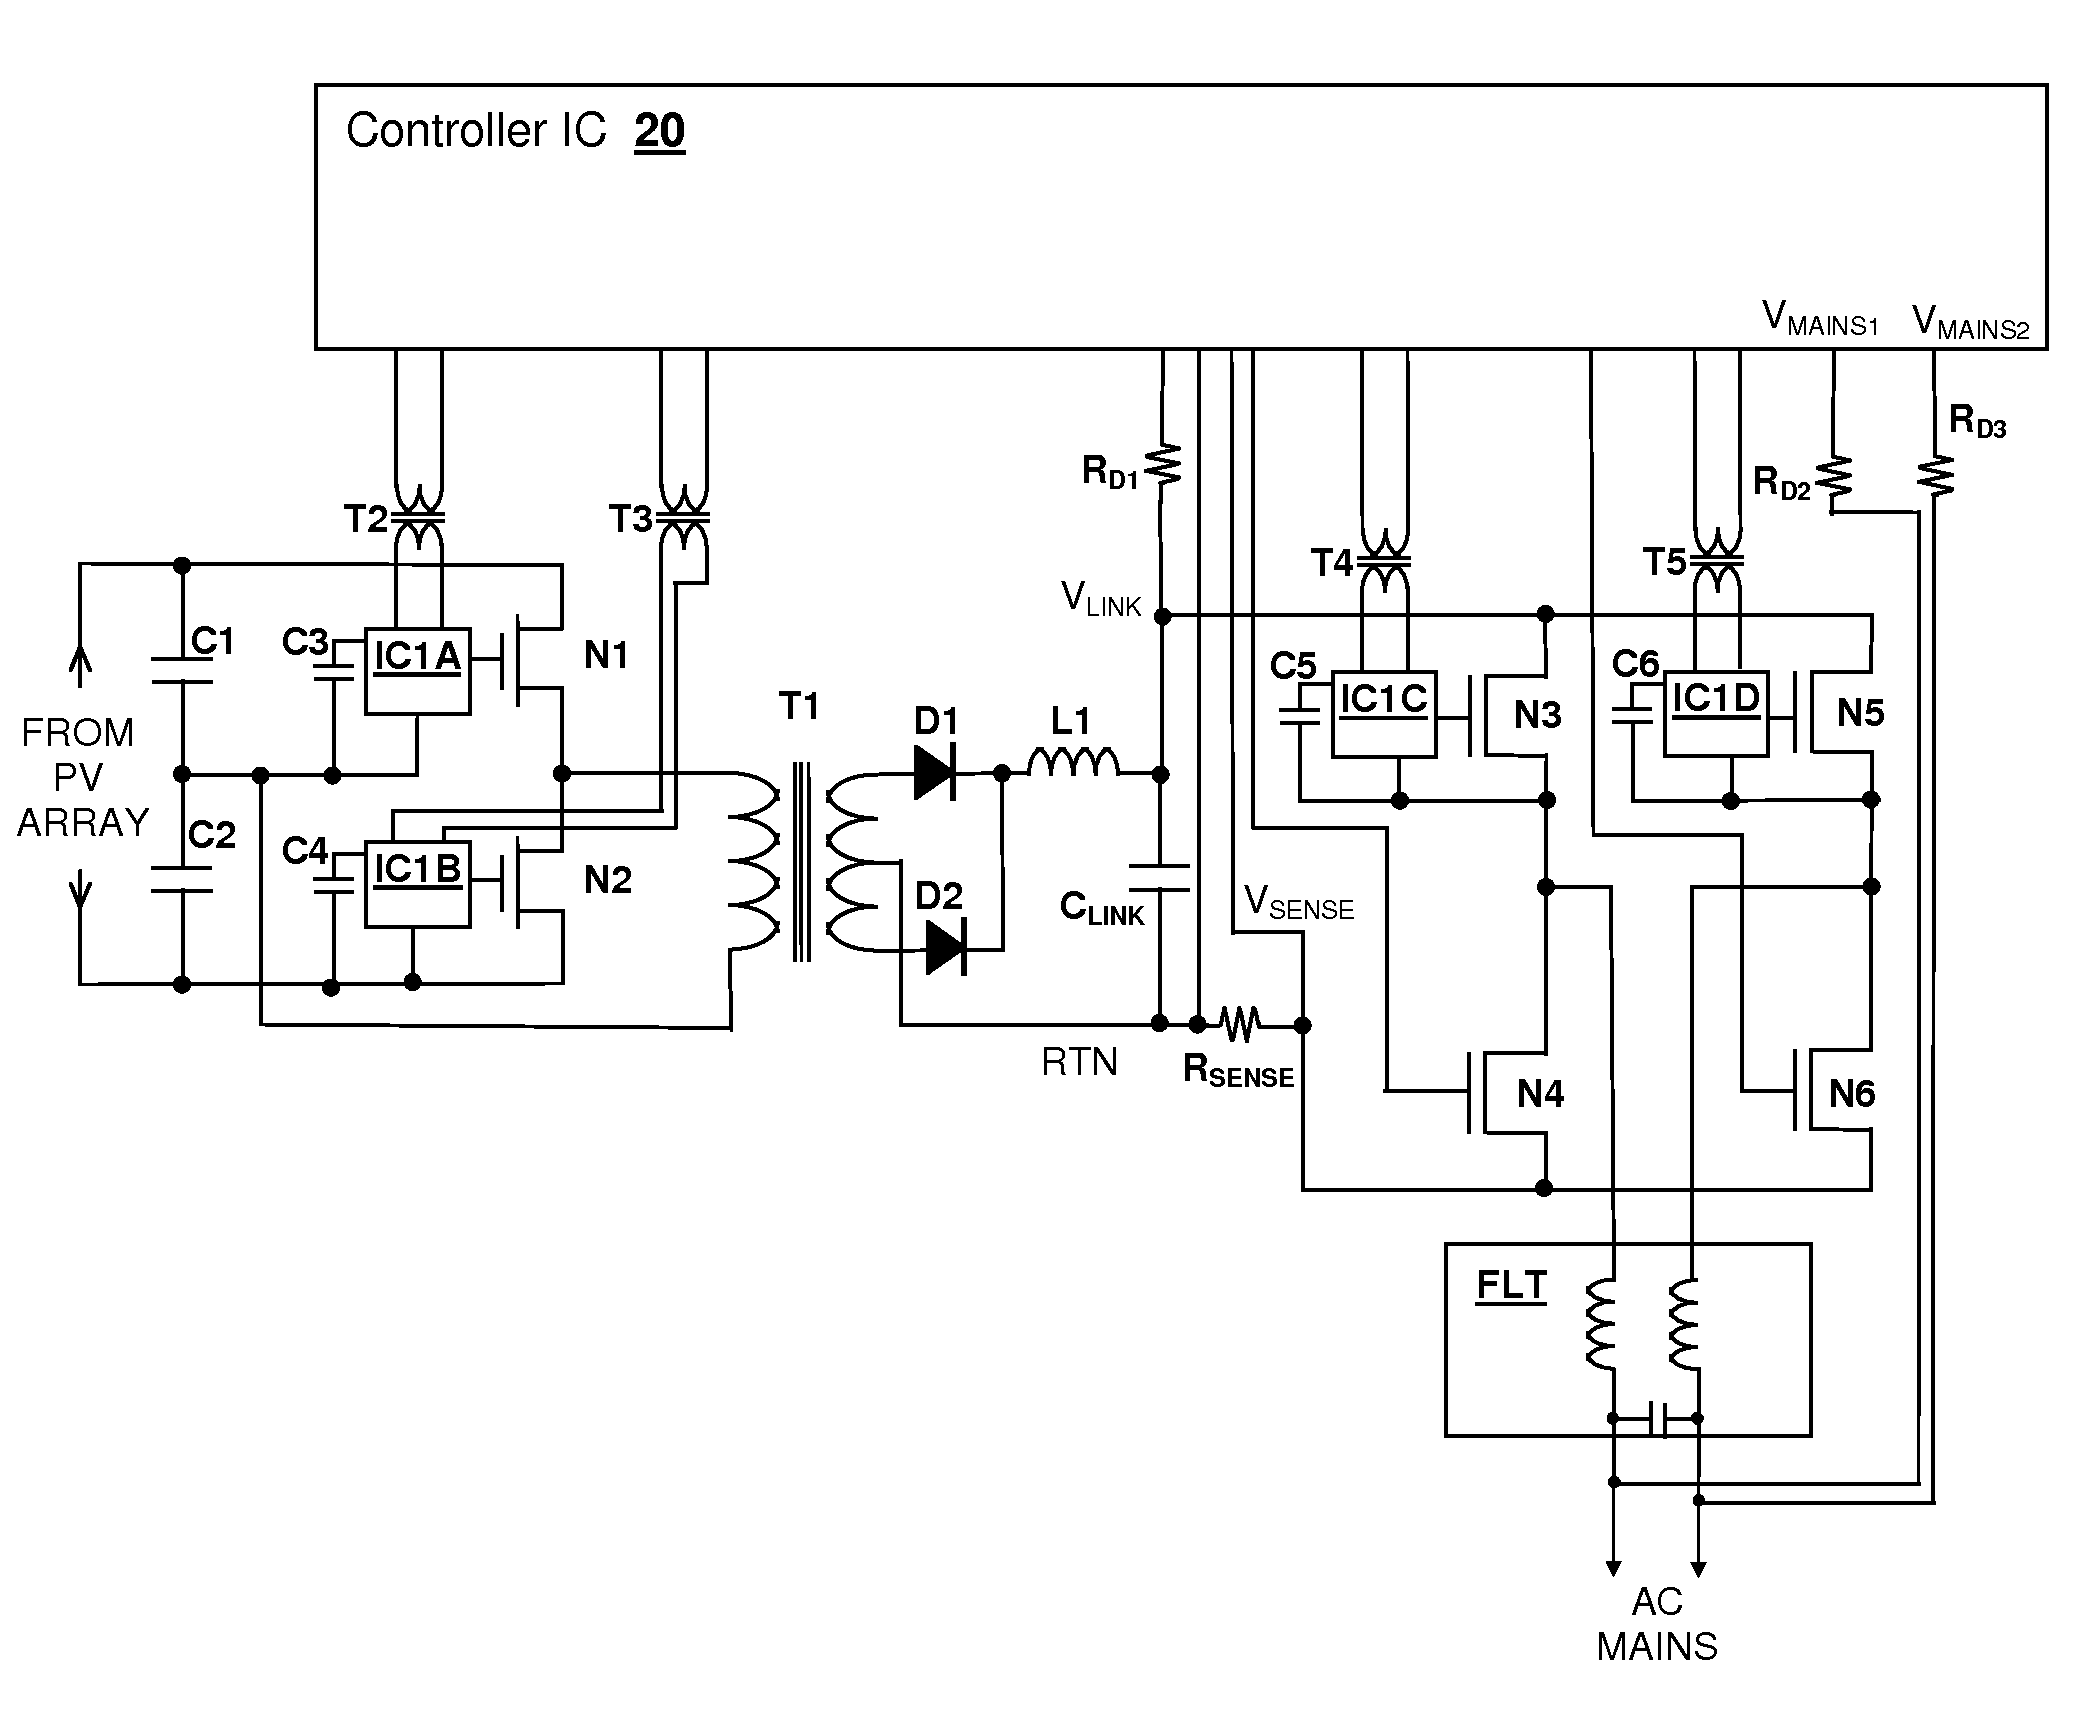 Cascaded switching power converter for coupling a photovoltaic energy source to power mains